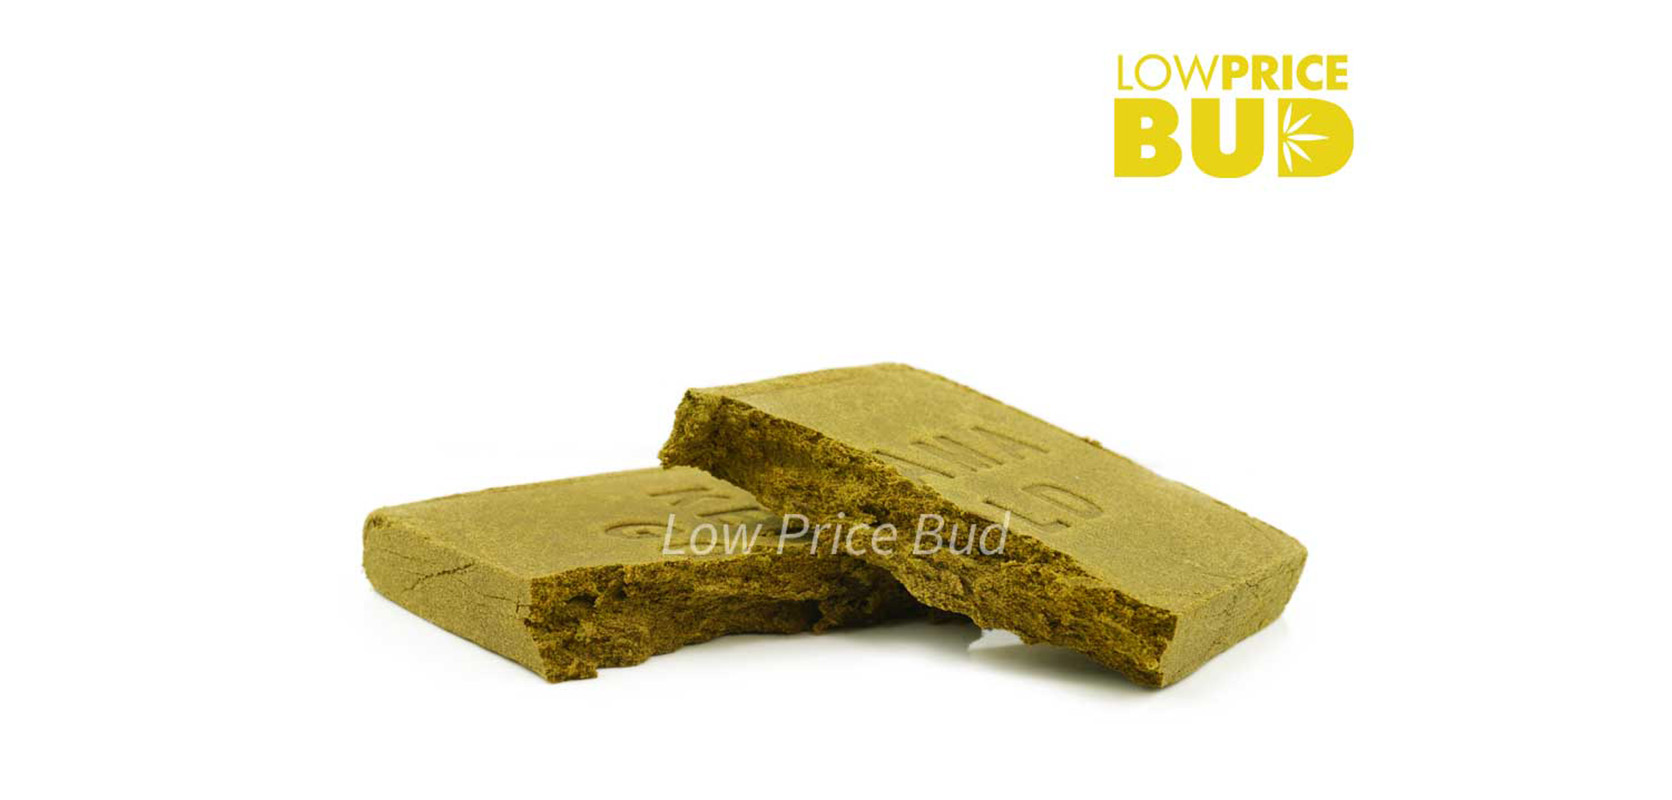 hash weed concentrate for sale from low price bud mail order marijuana online dispensary for weed online.